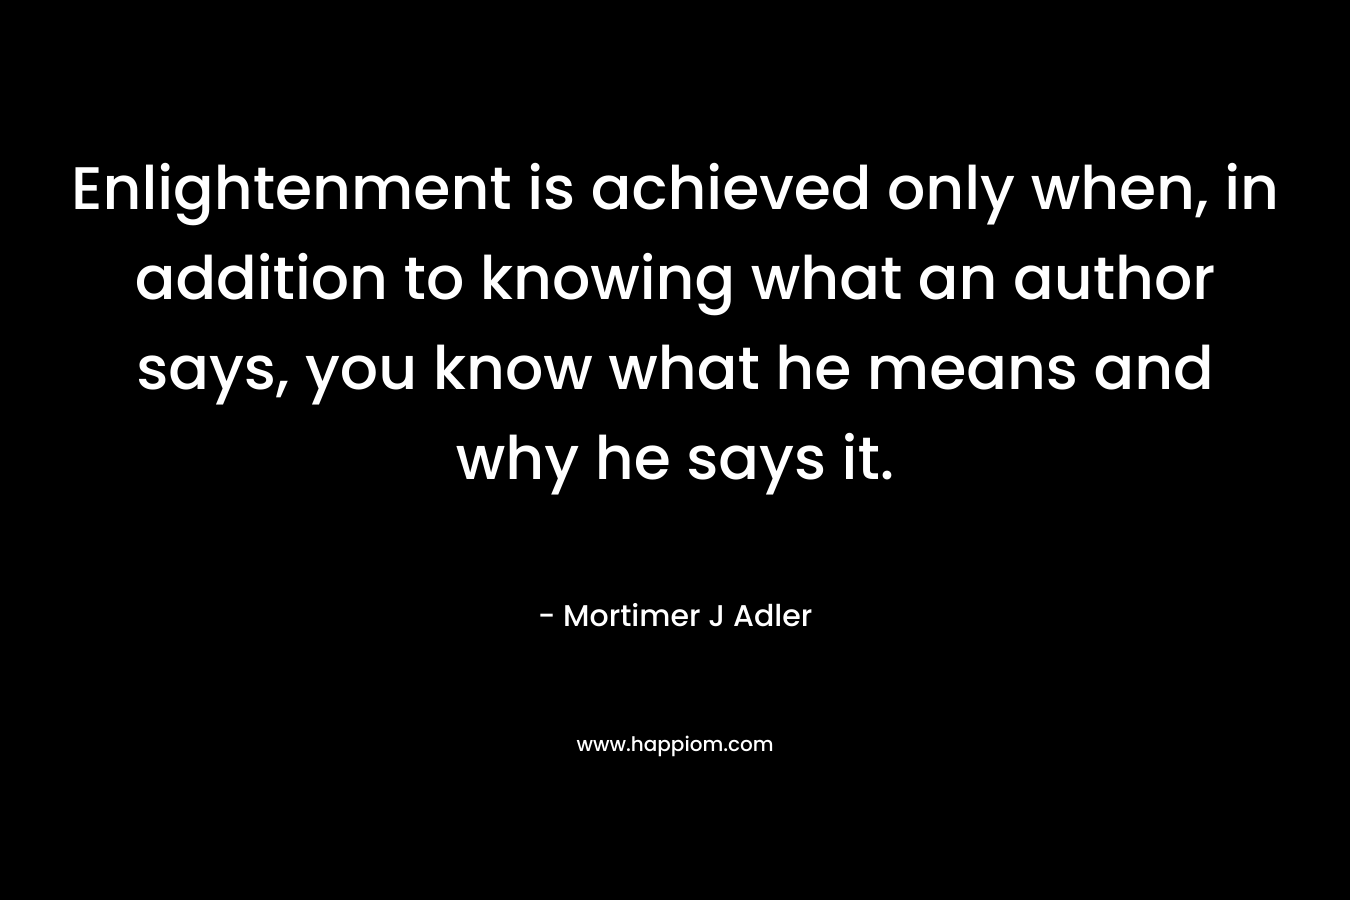 Enlightenment is achieved only when, in addition to knowing what an author says, you know what he means and why he says it.